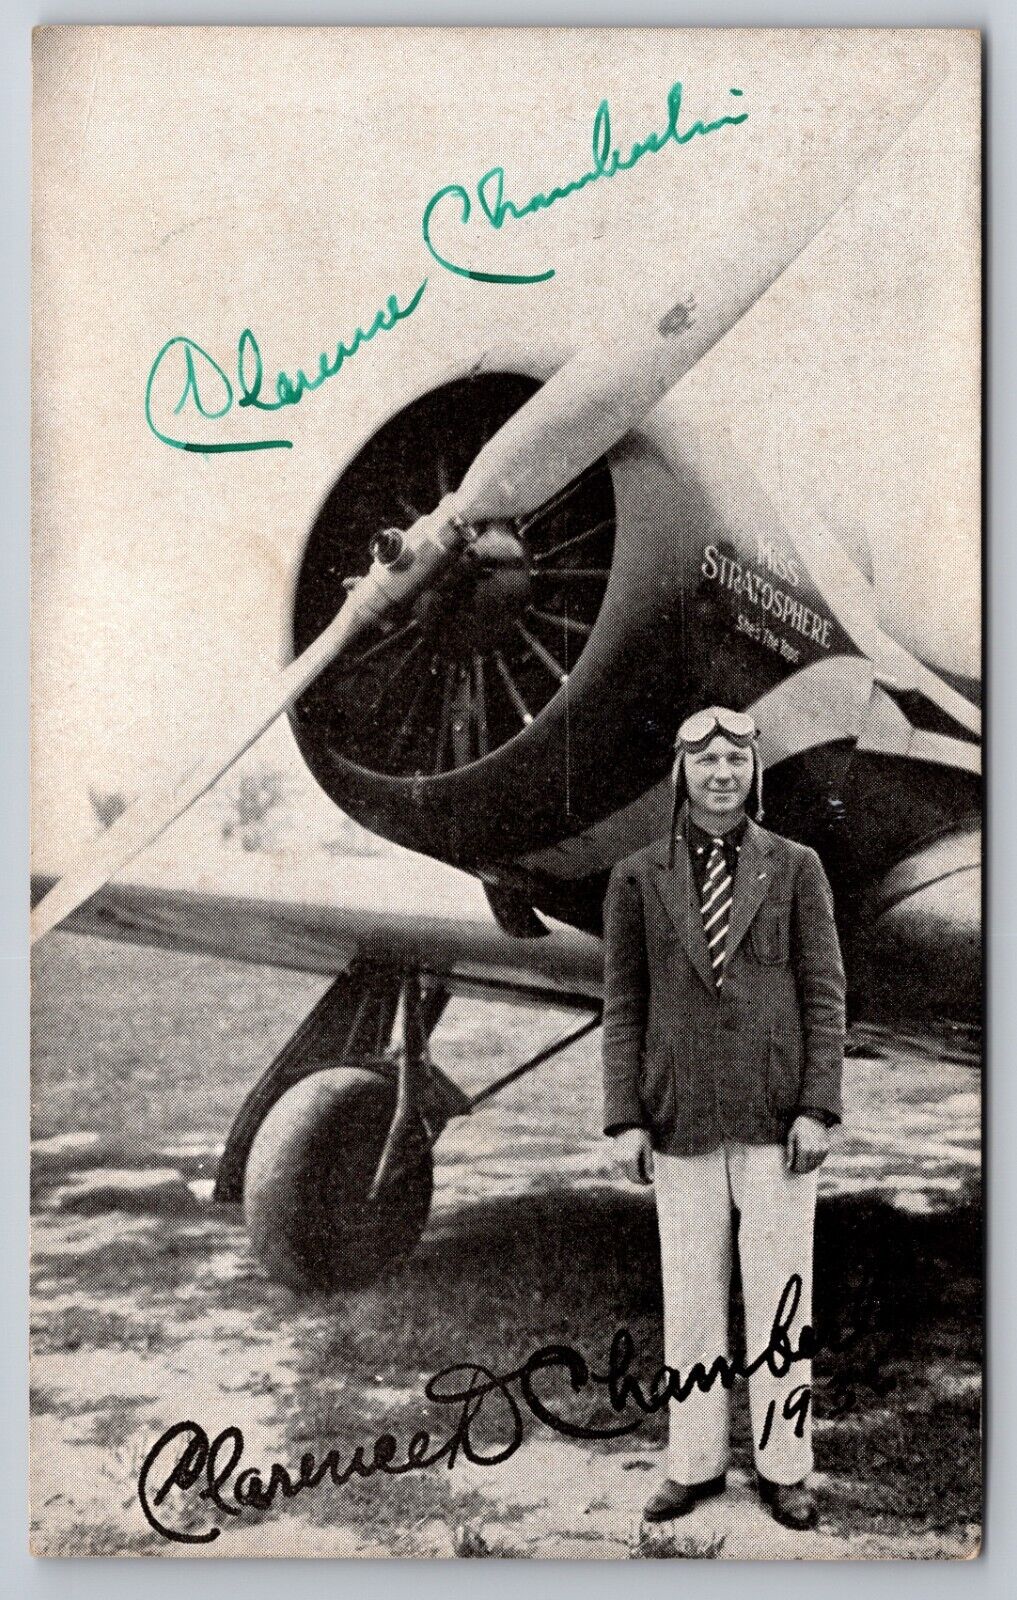 Clarence Chamberlin Aviator Miss Stratosphere Plane Signed c1930s Postcard